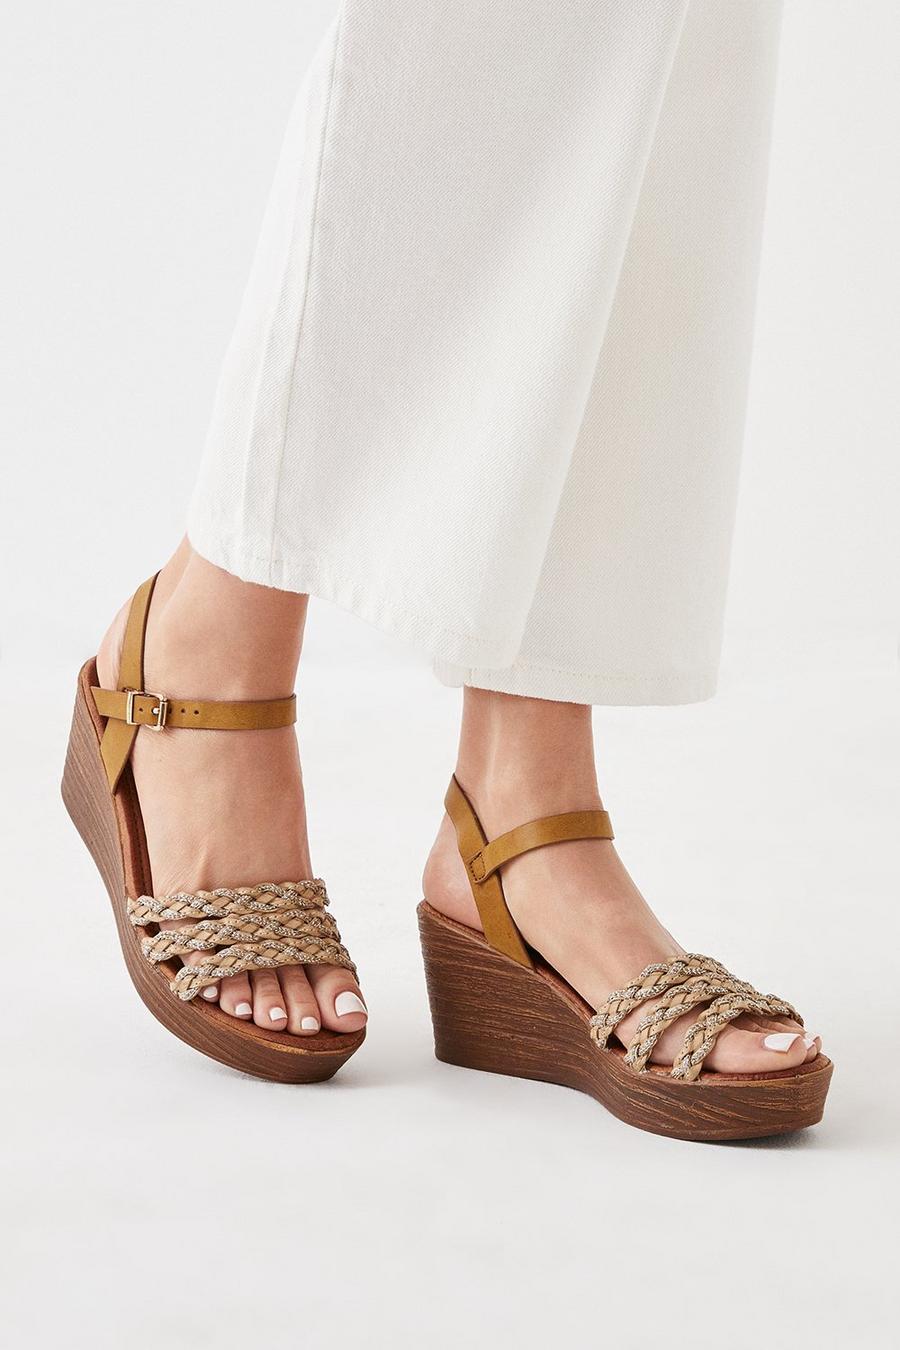 Good For The Sole: Harmony Comfort Wedges